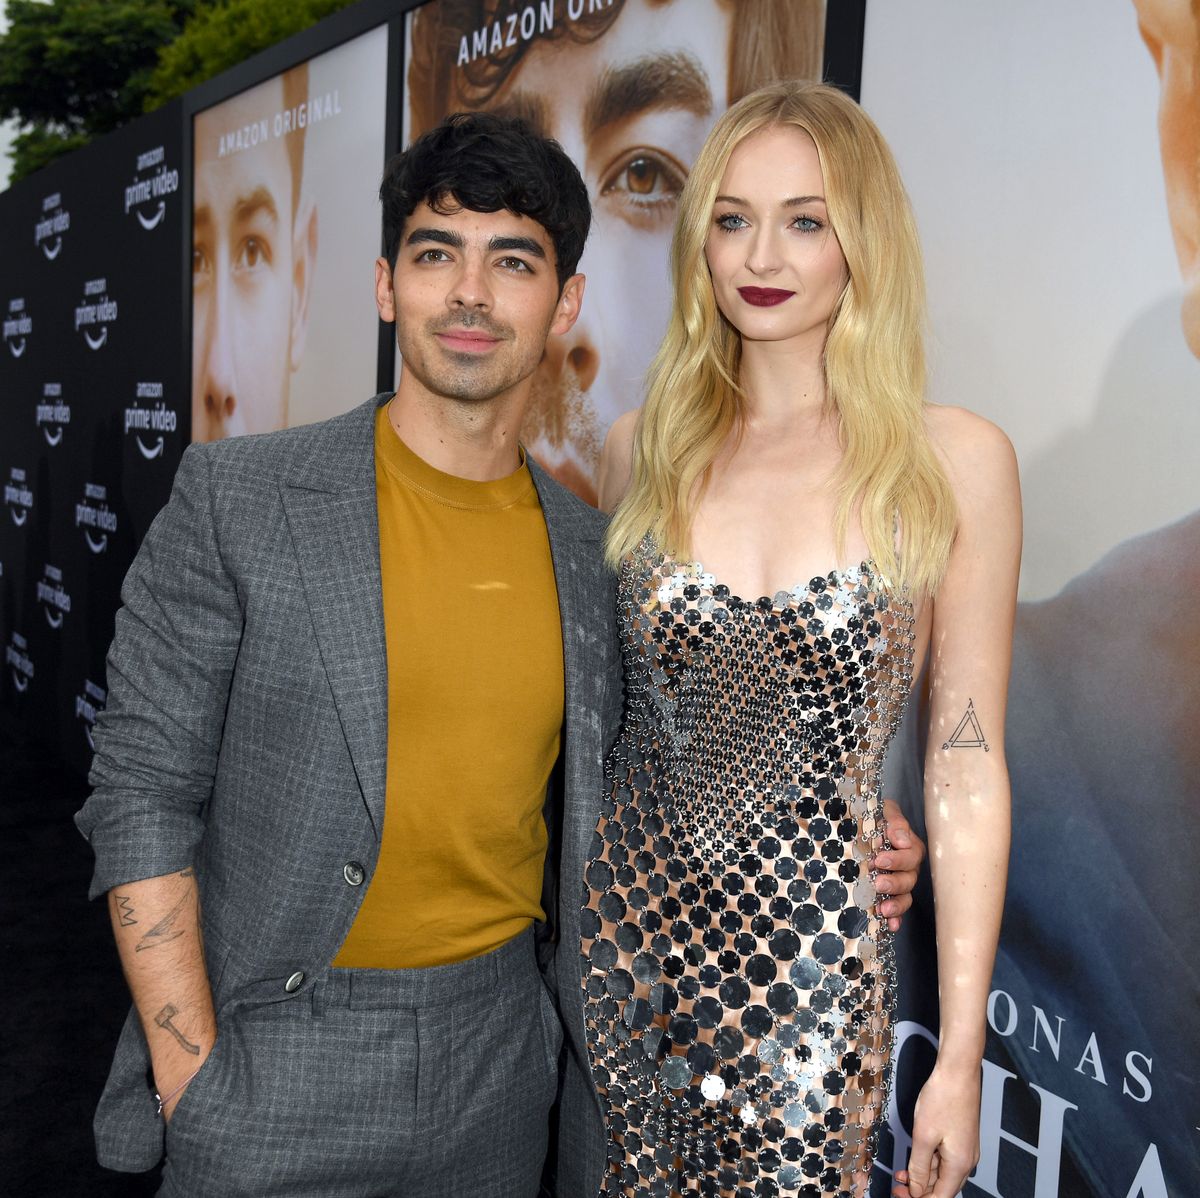 Sophie Turner at The 2023 LVMH Prize Semi Final Cocktail